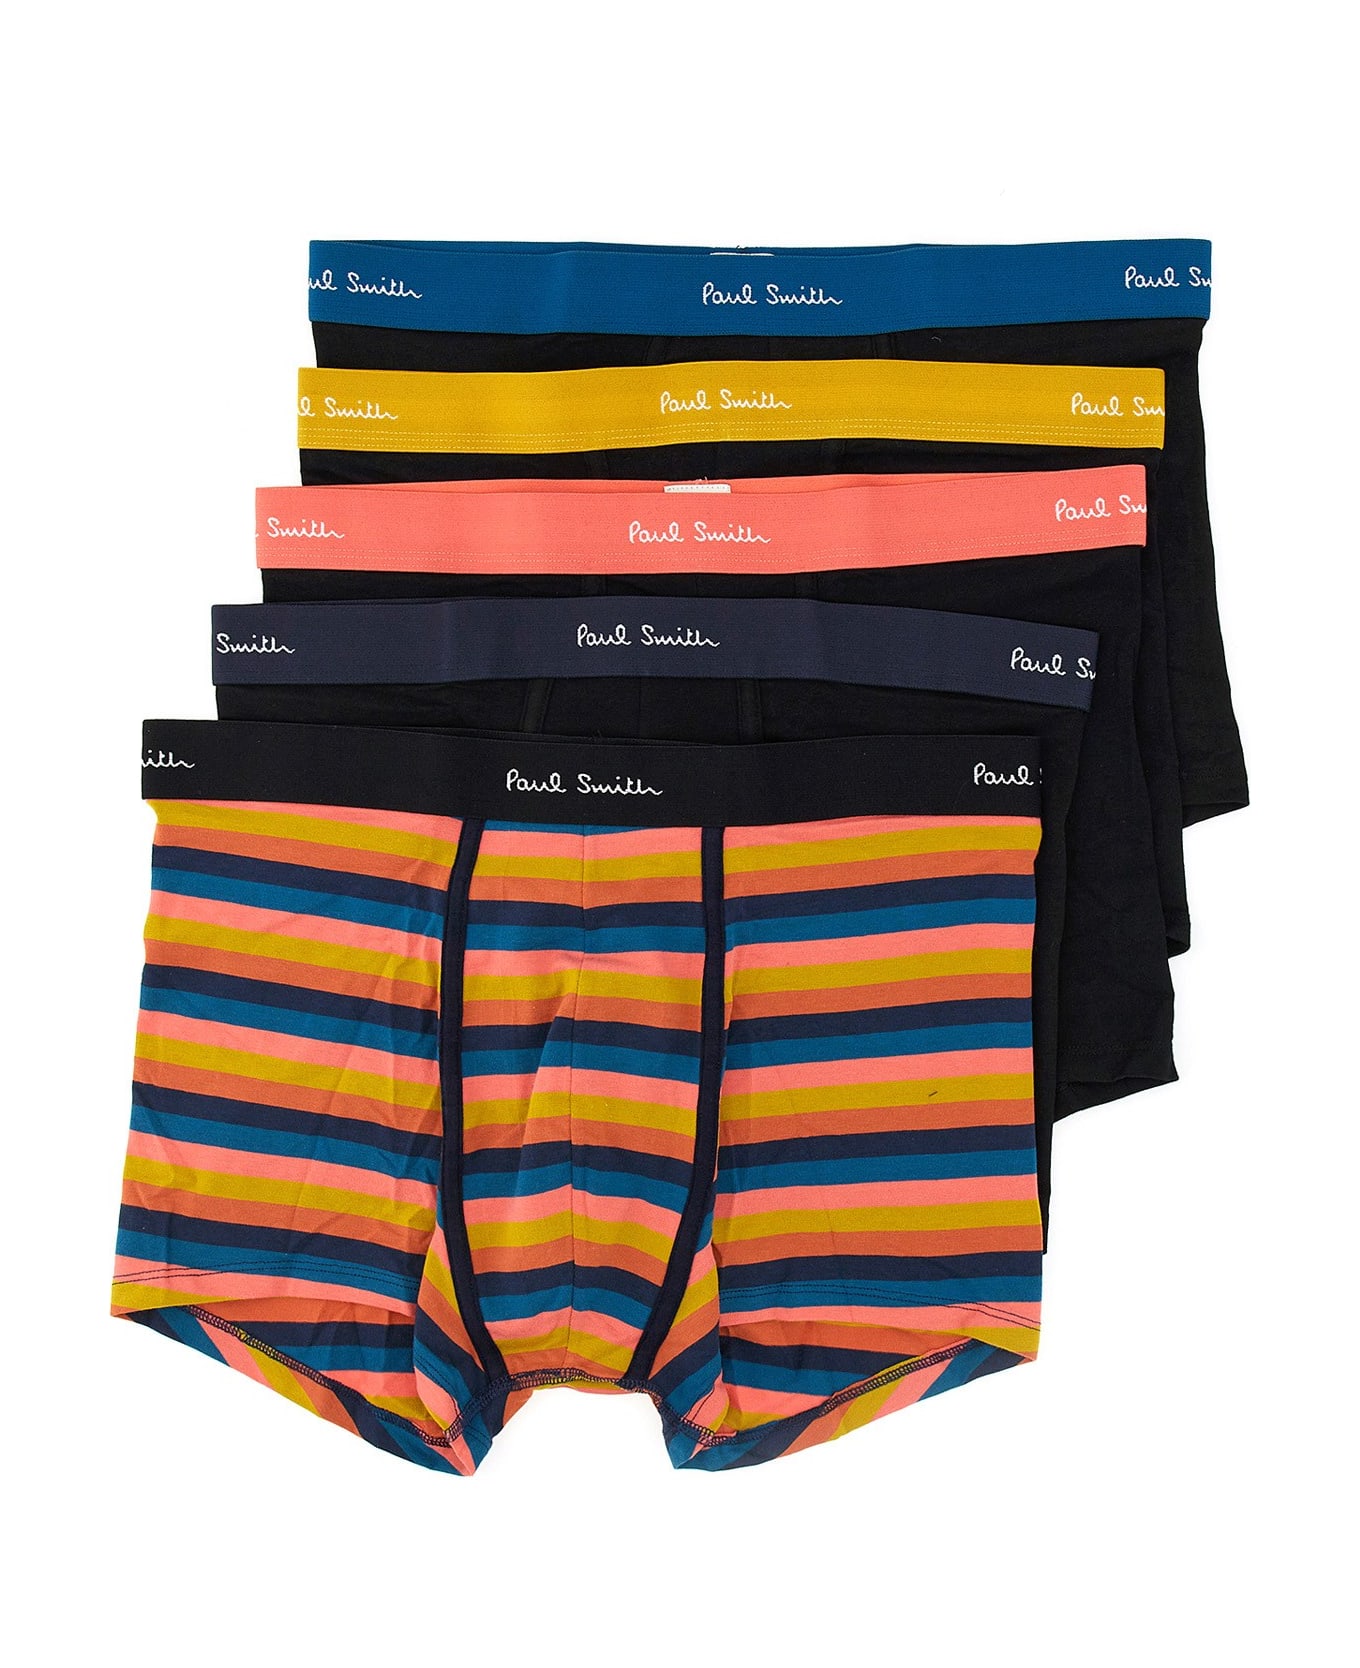 Paul Smith Pack Of Five Boxer Shorts - Black ショーツ